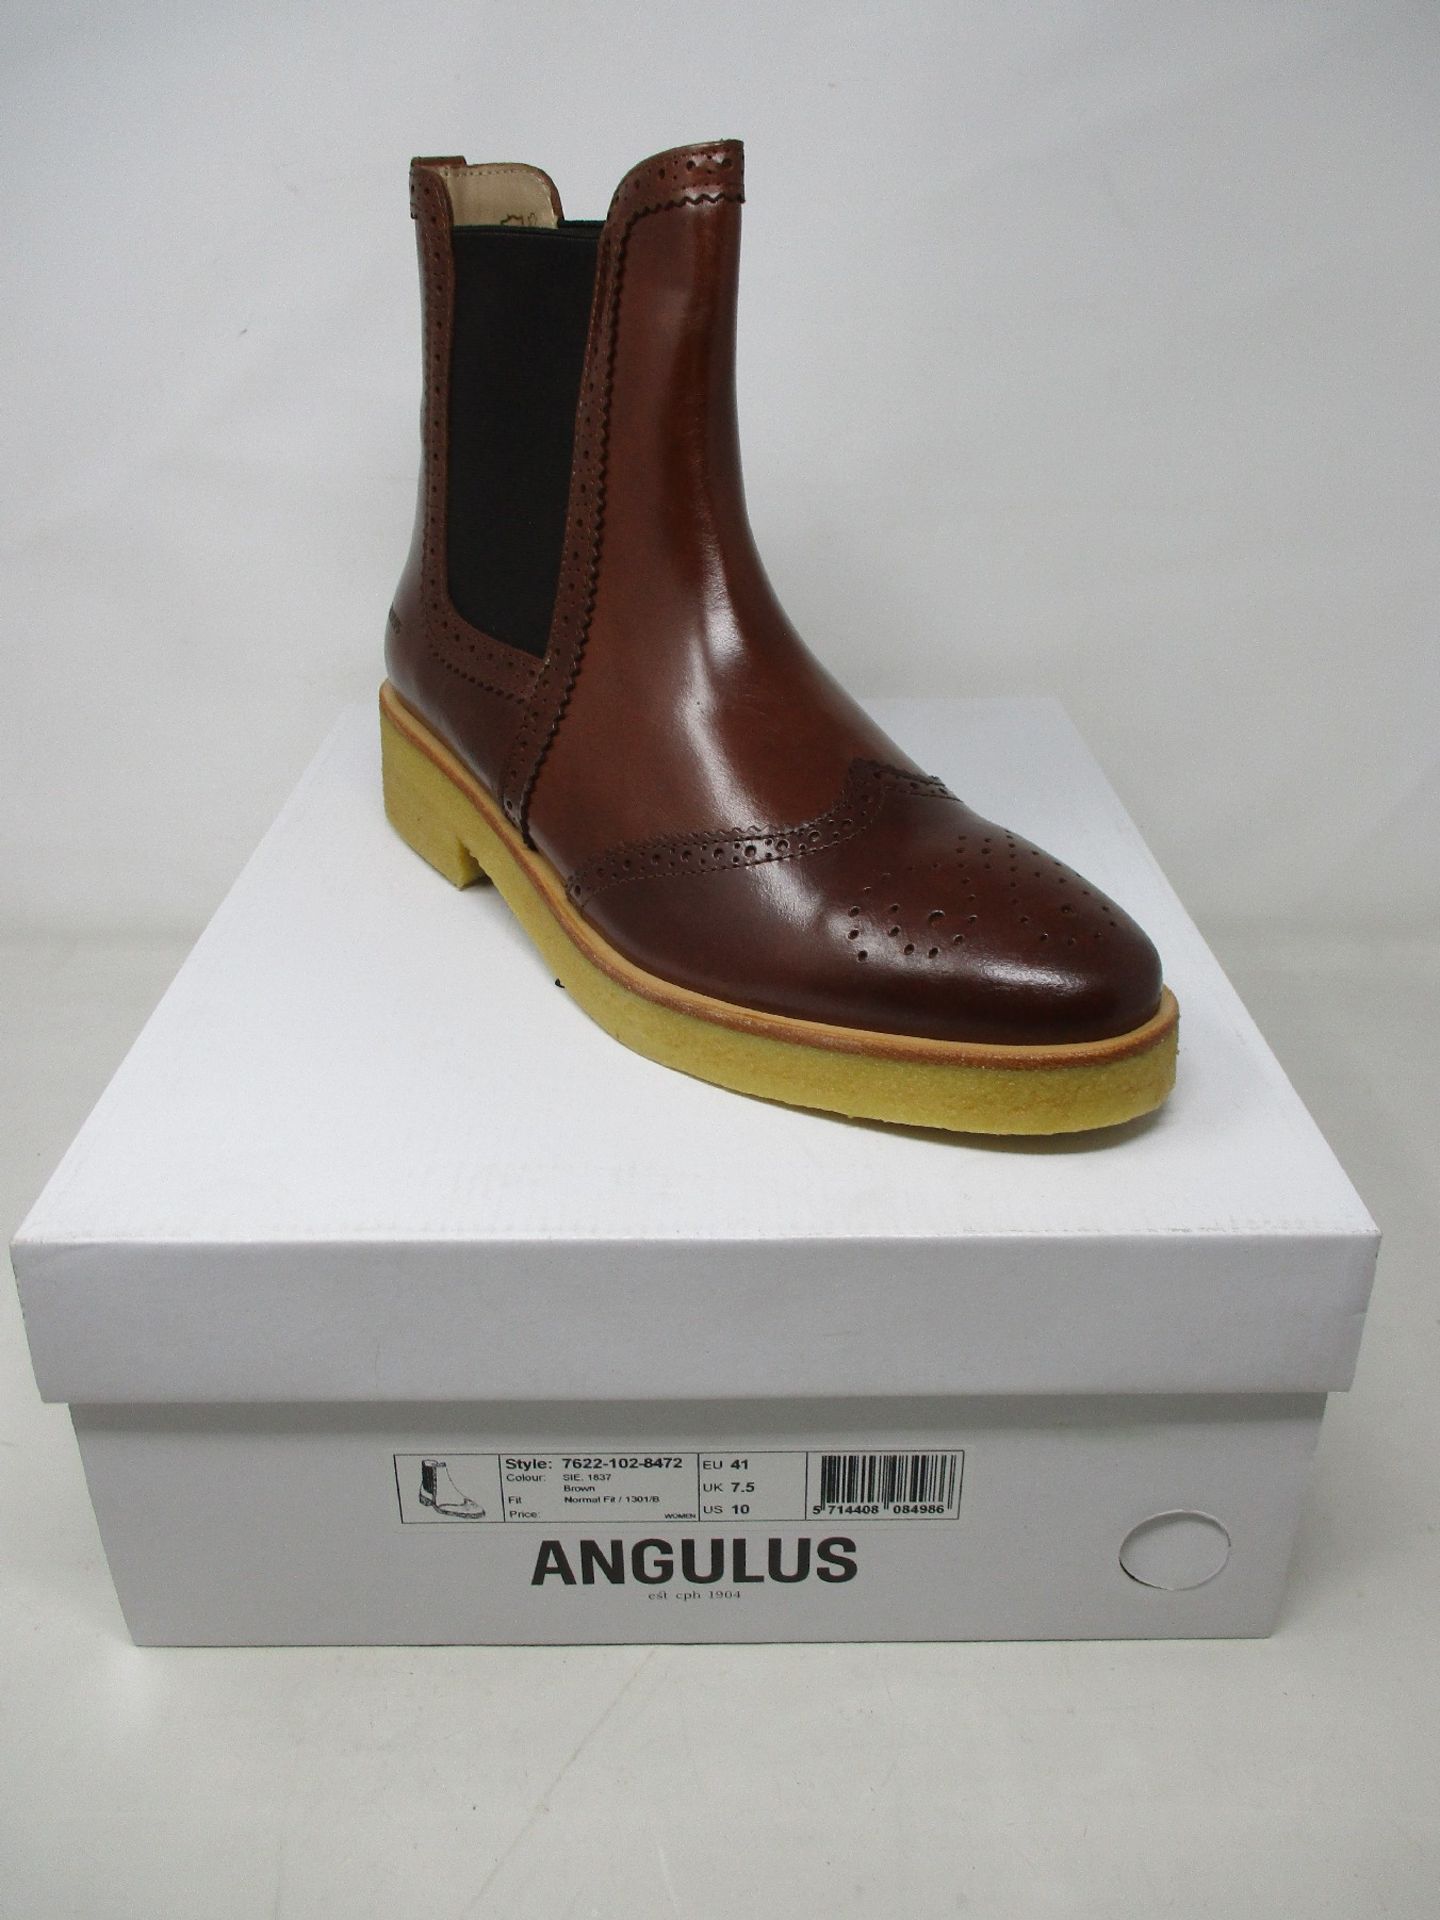 A pair of as new Angulus Chelsea boots 7622-1028472 (UK 7.5 - RRP €154).